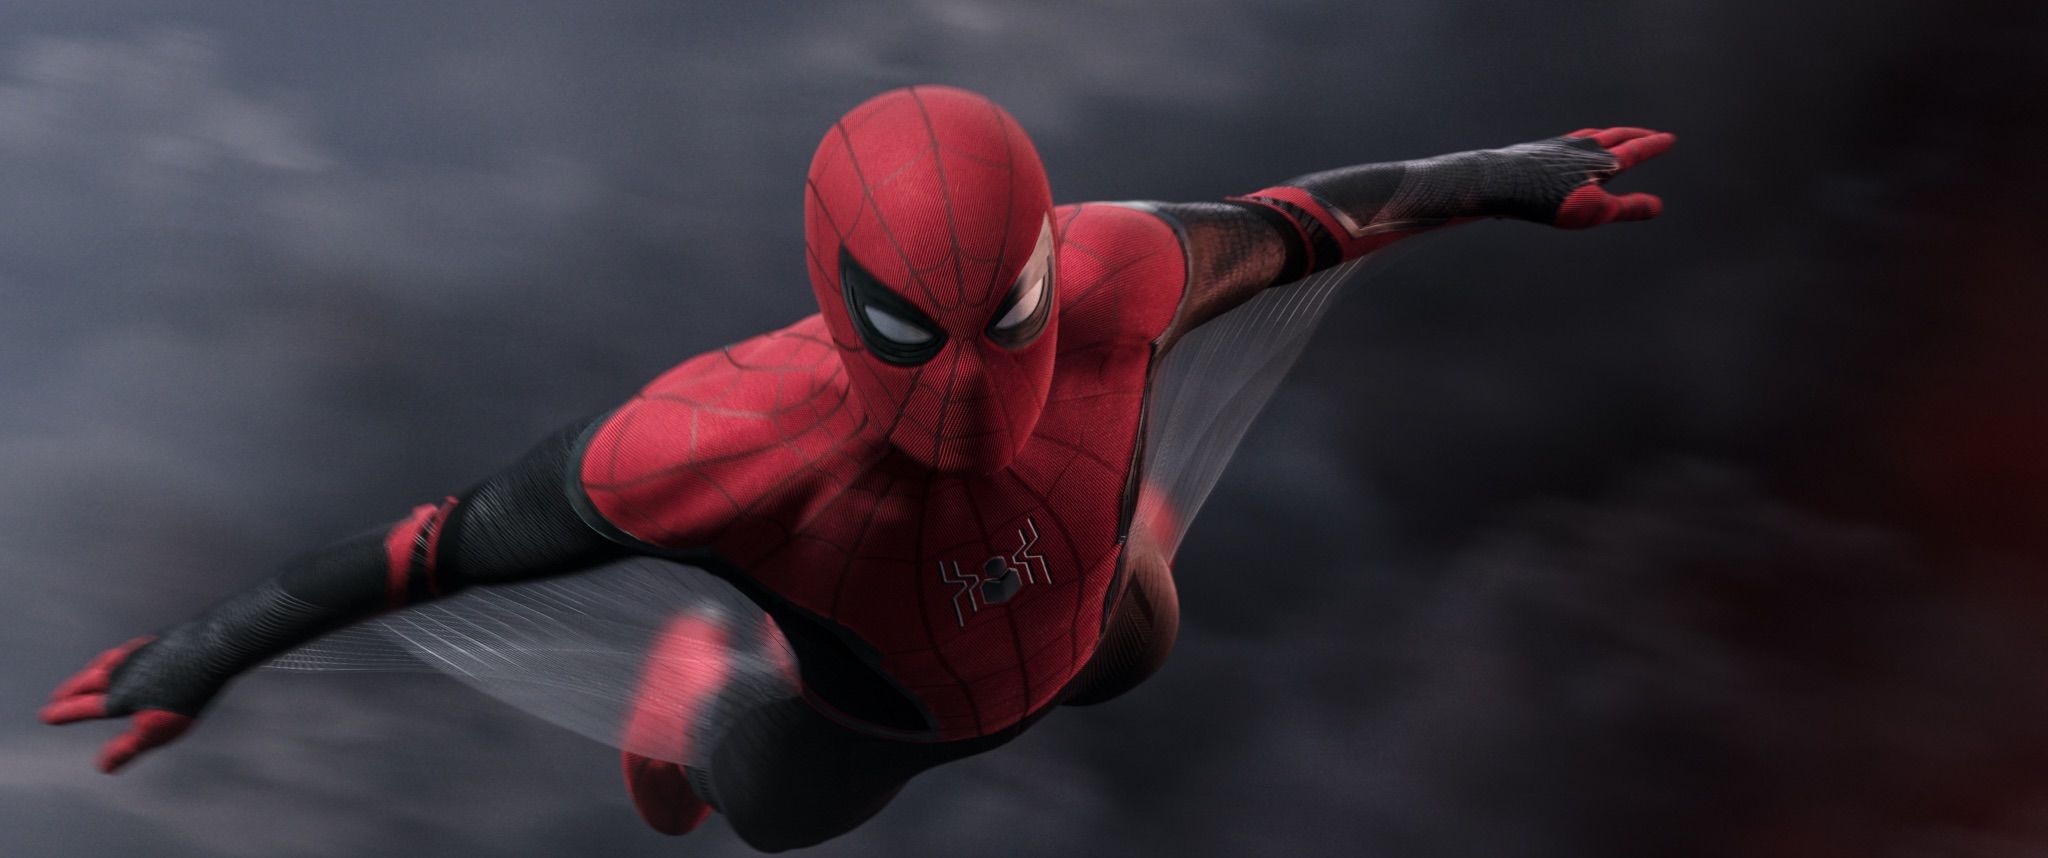 Spider-Man: Far From Home flying suit